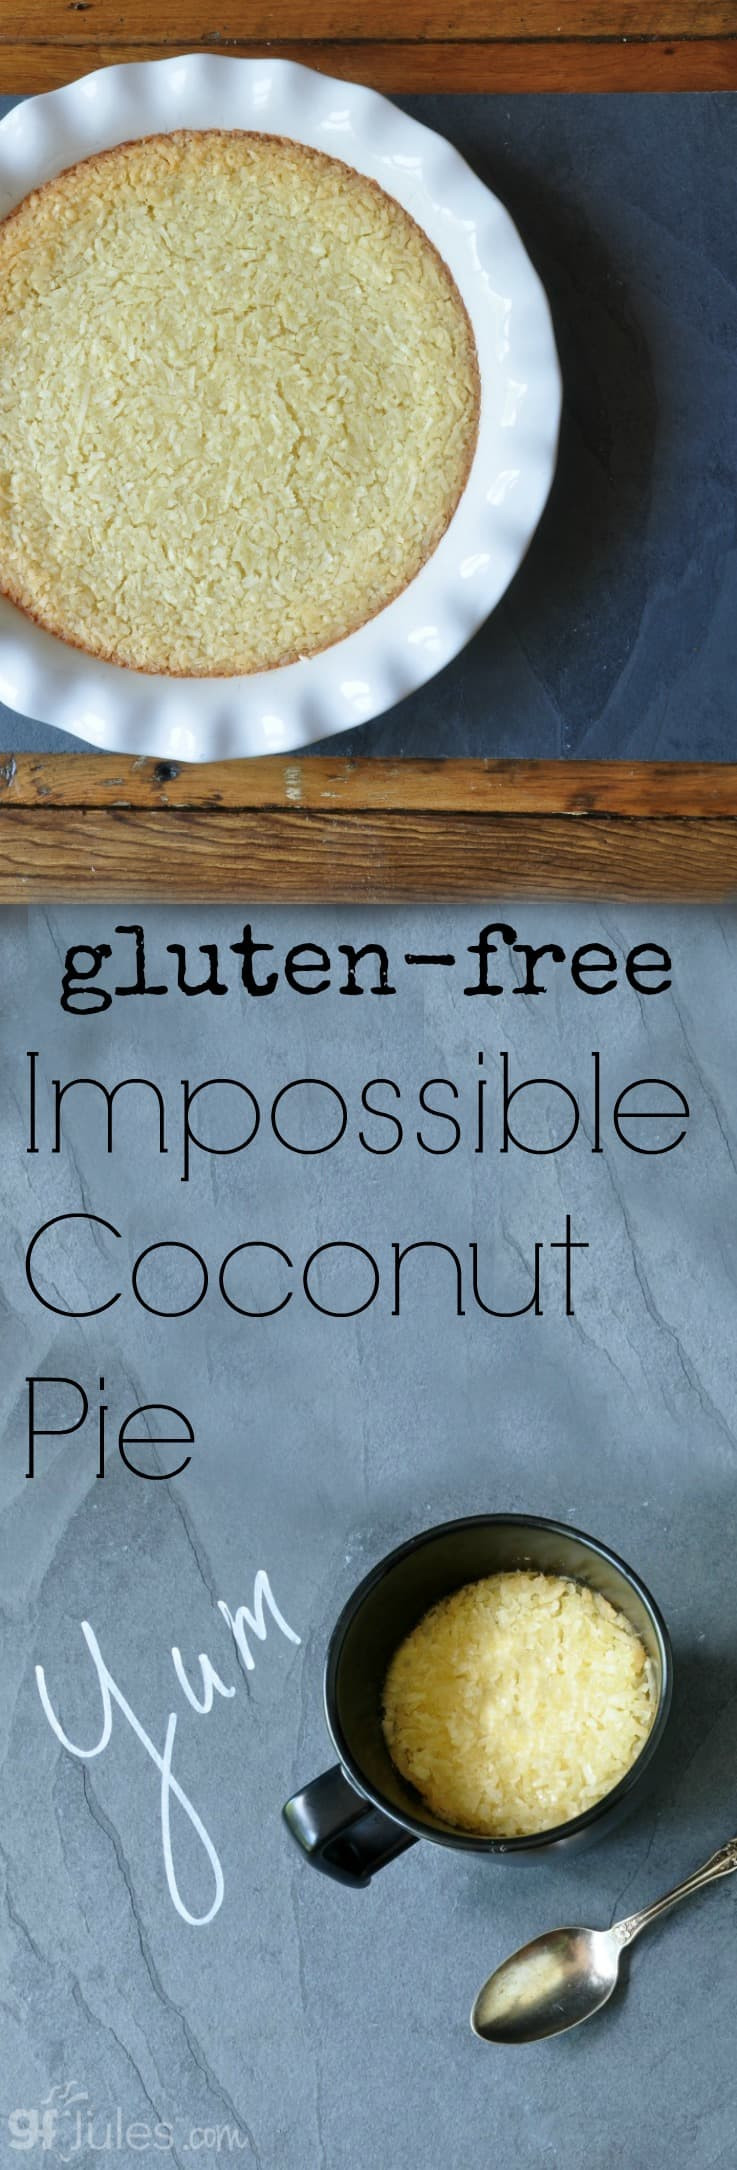 Gluten Free Coconut Pie
 Easy Gluten Free Coconut Pie Recipes Yes you CAN